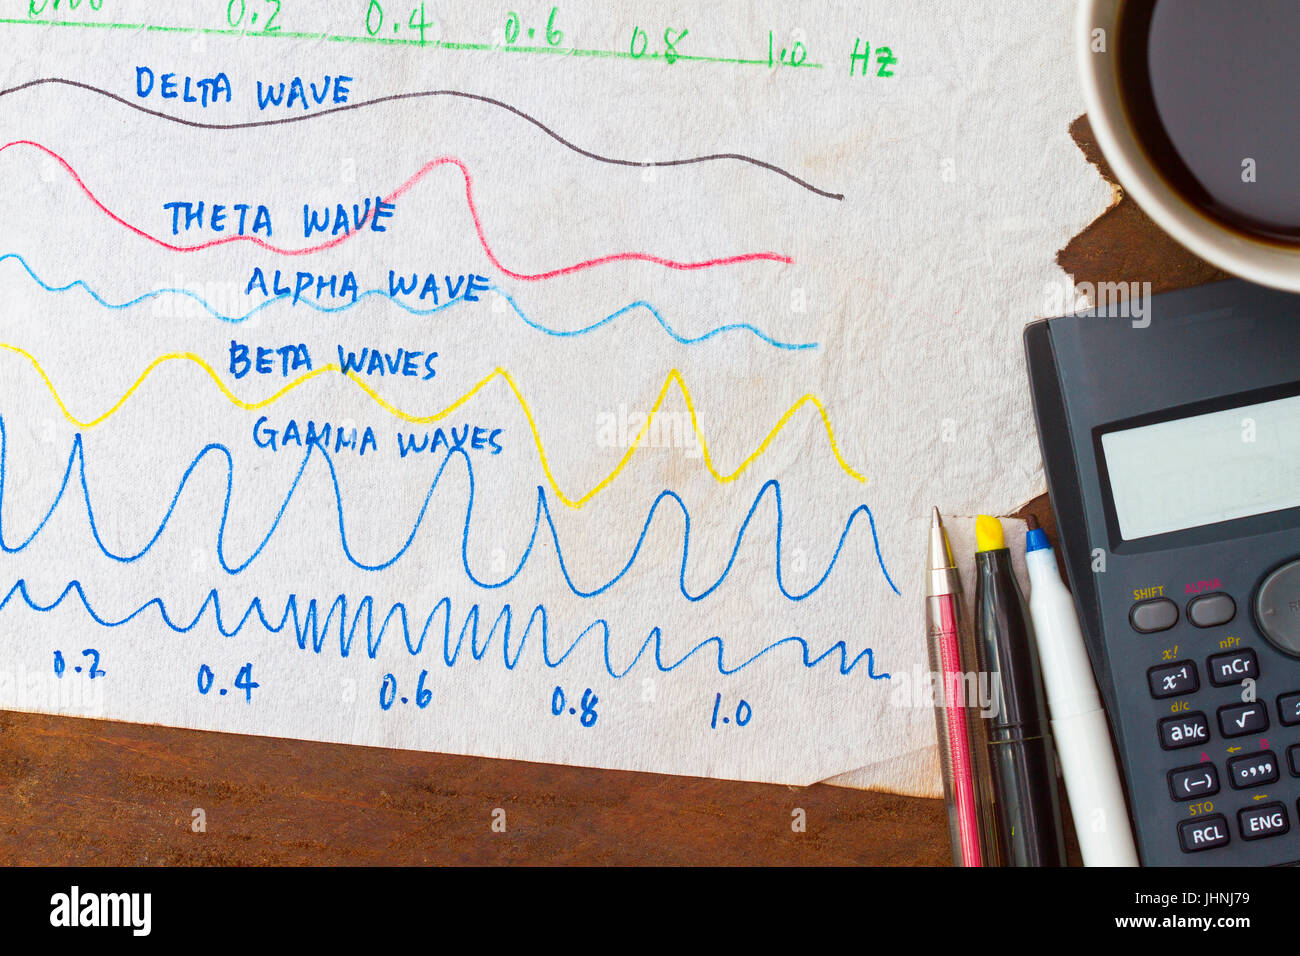 All about waves- sketches on napkin ideas about waves. Stock Photo